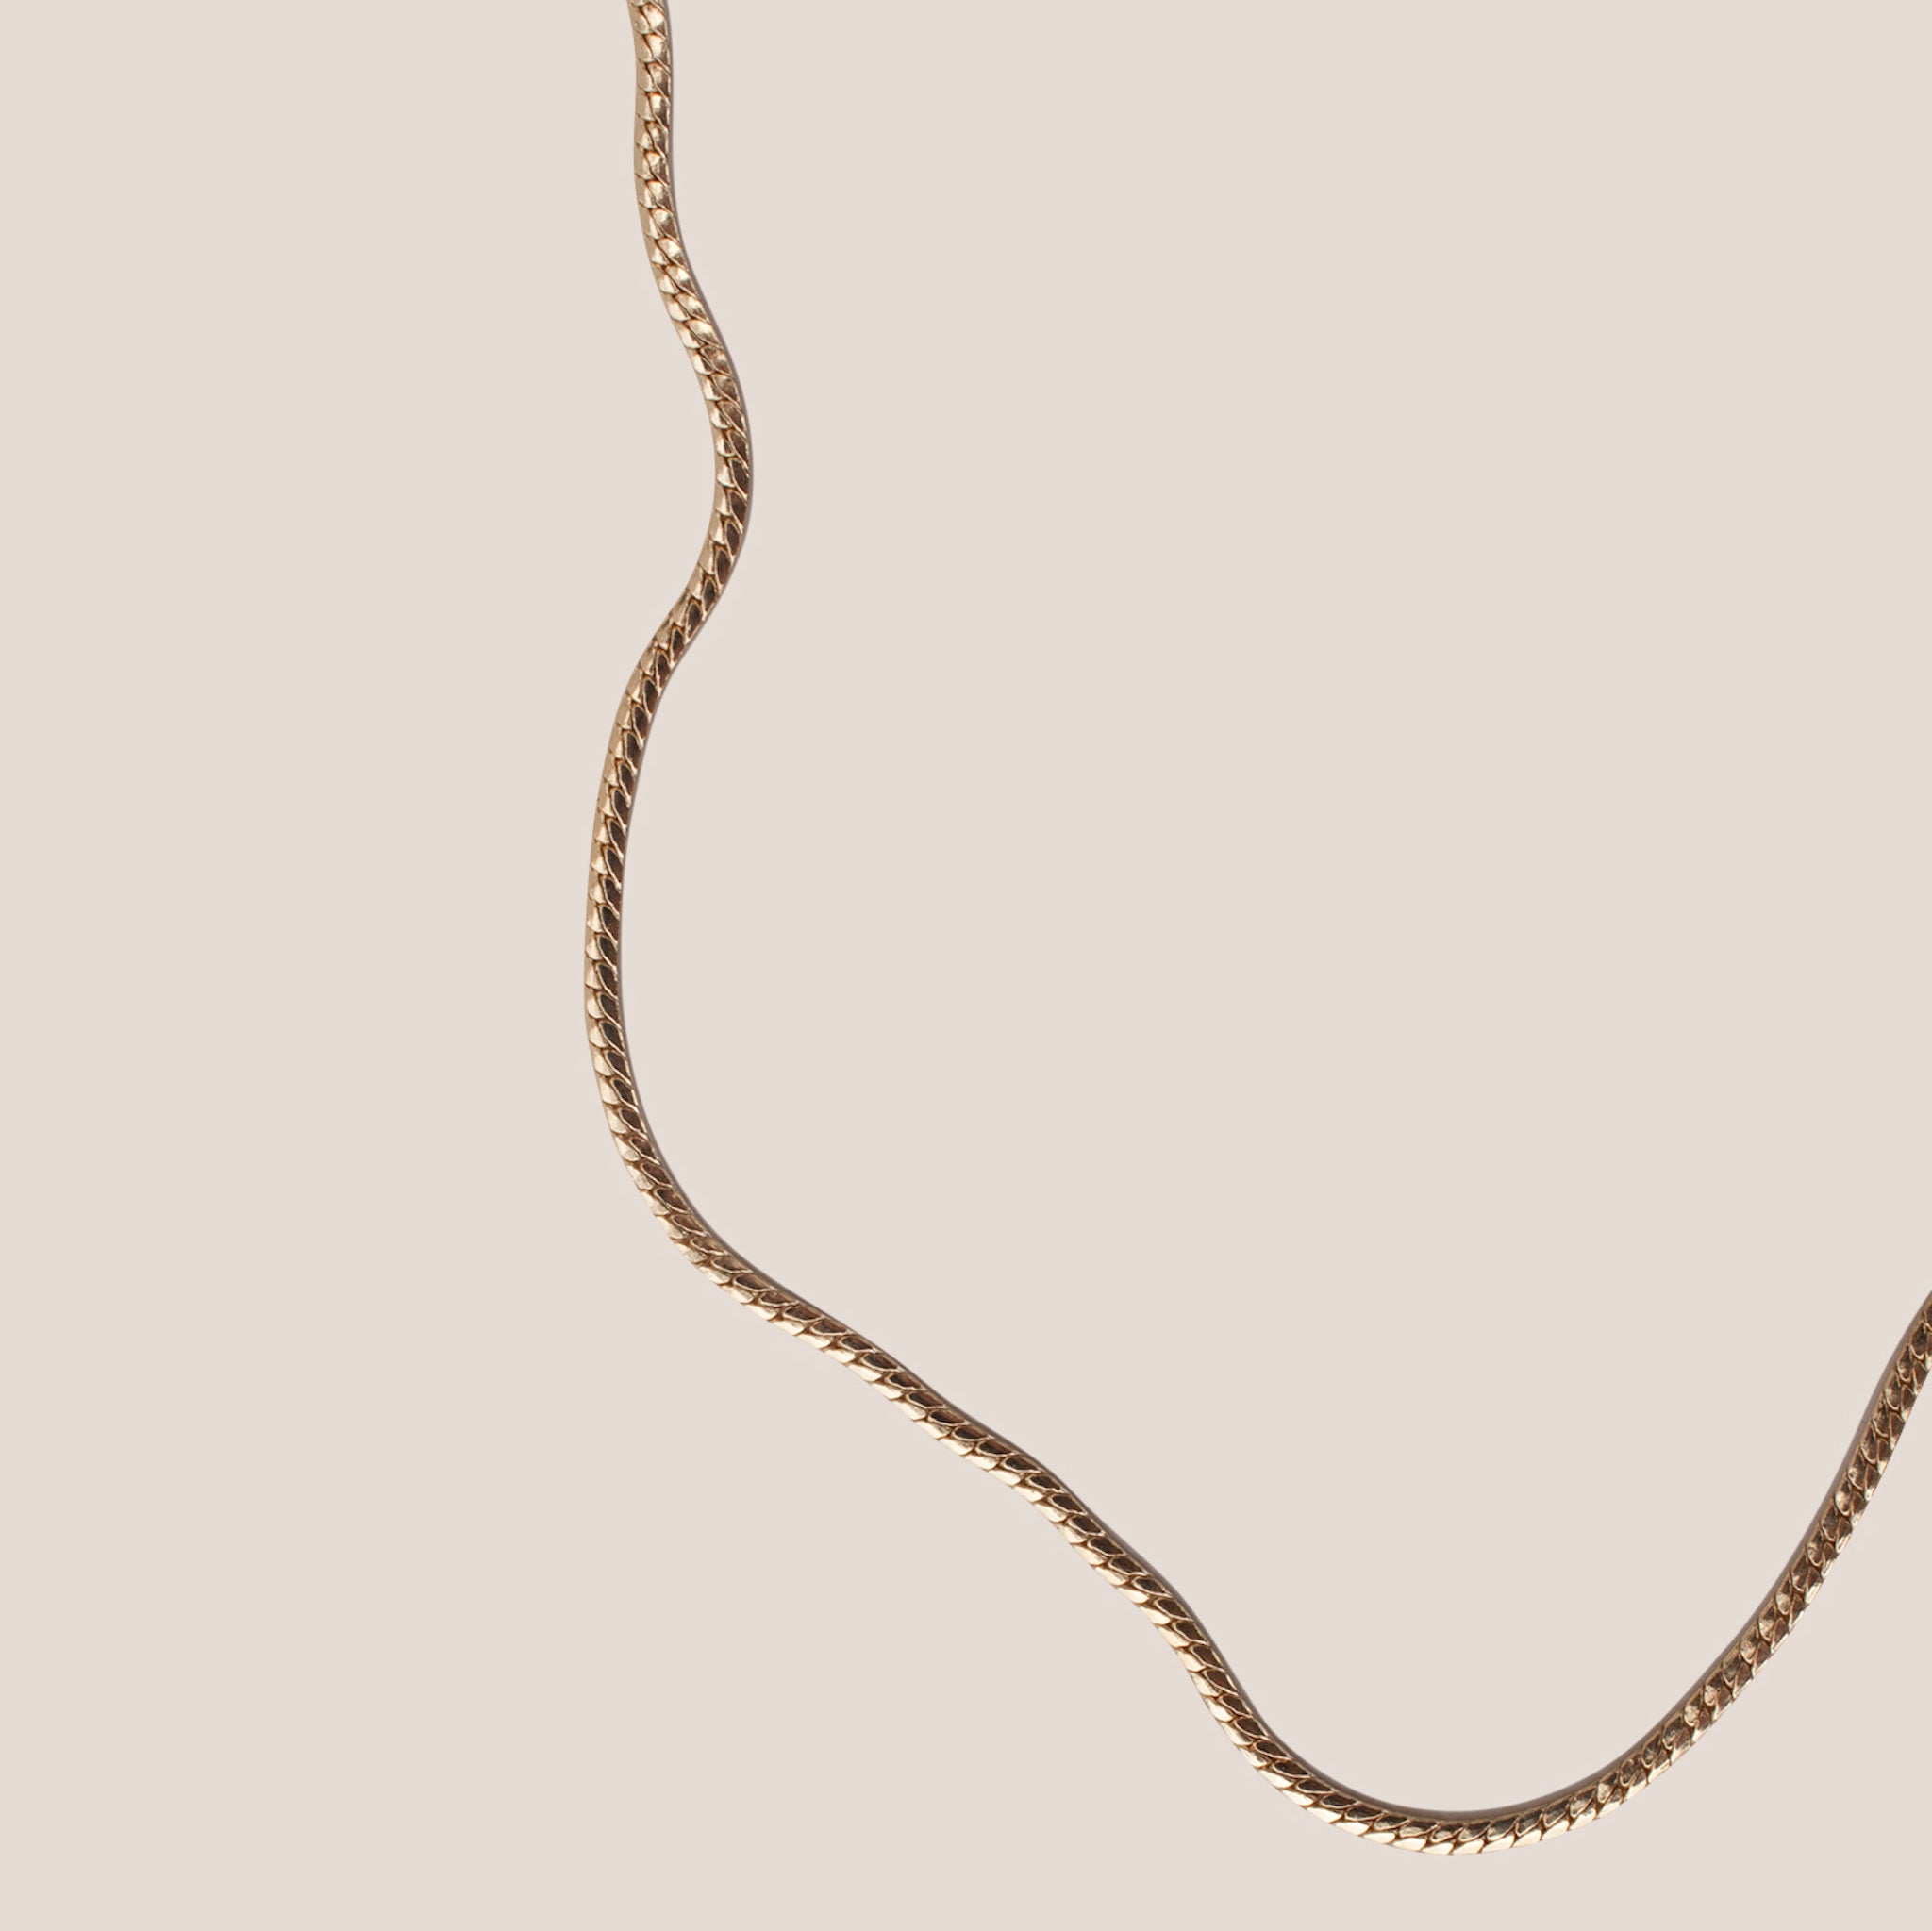 Laura Lombardi - Mini Omega Chain Necklace - detail view, available at LCD.